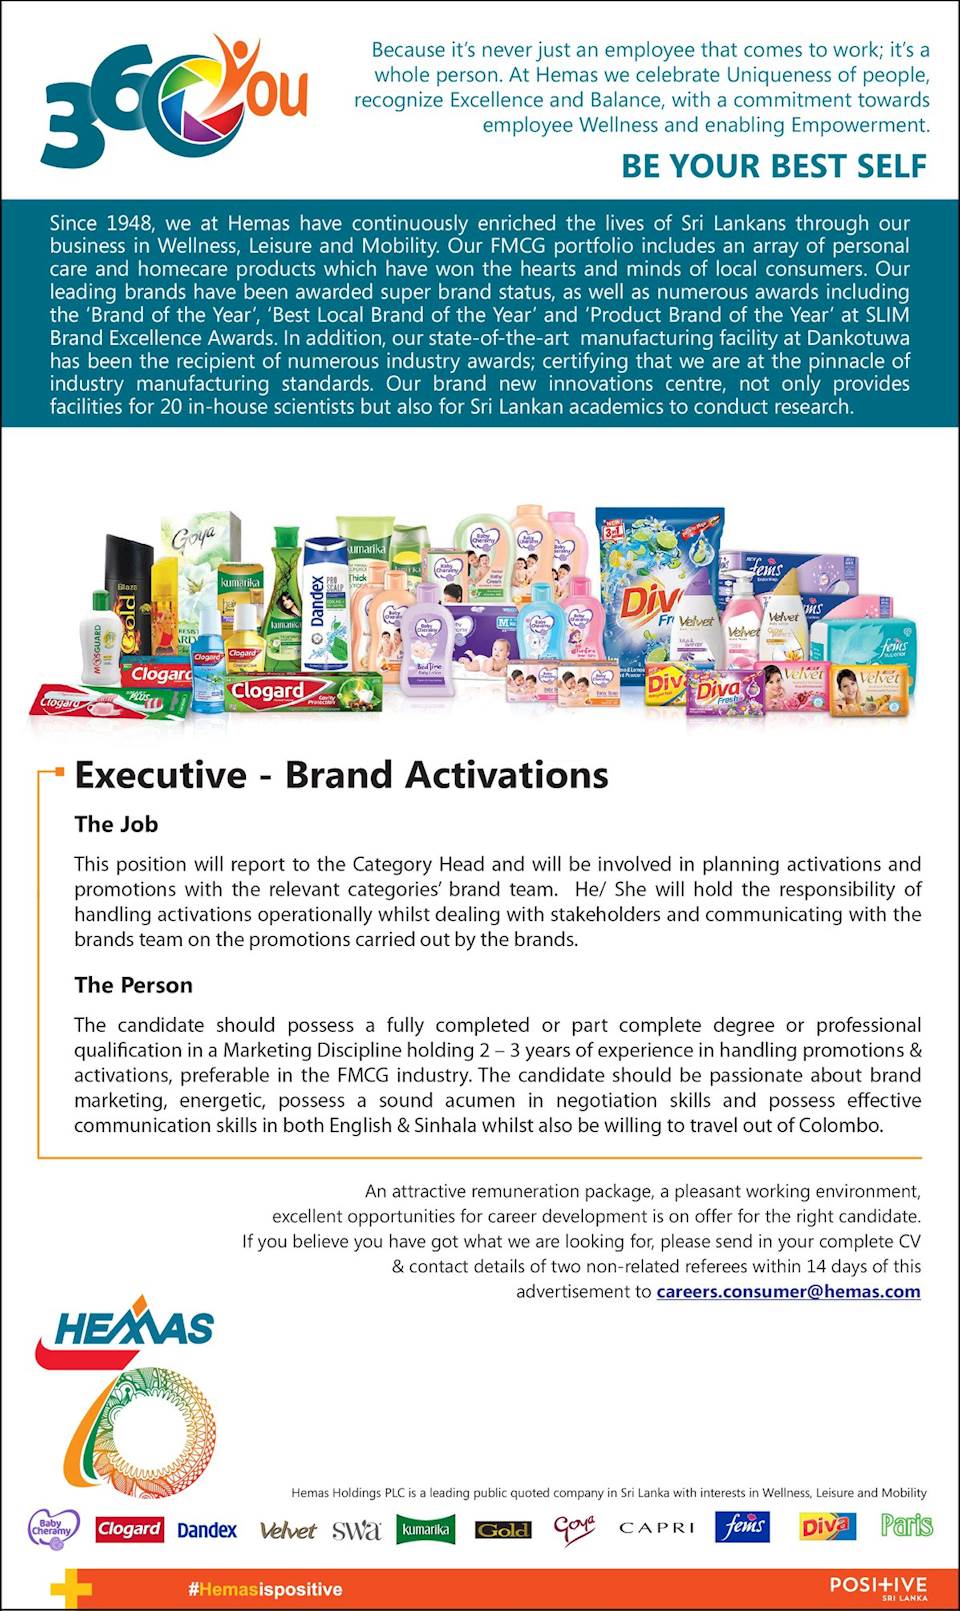 Executive - Brand Activations